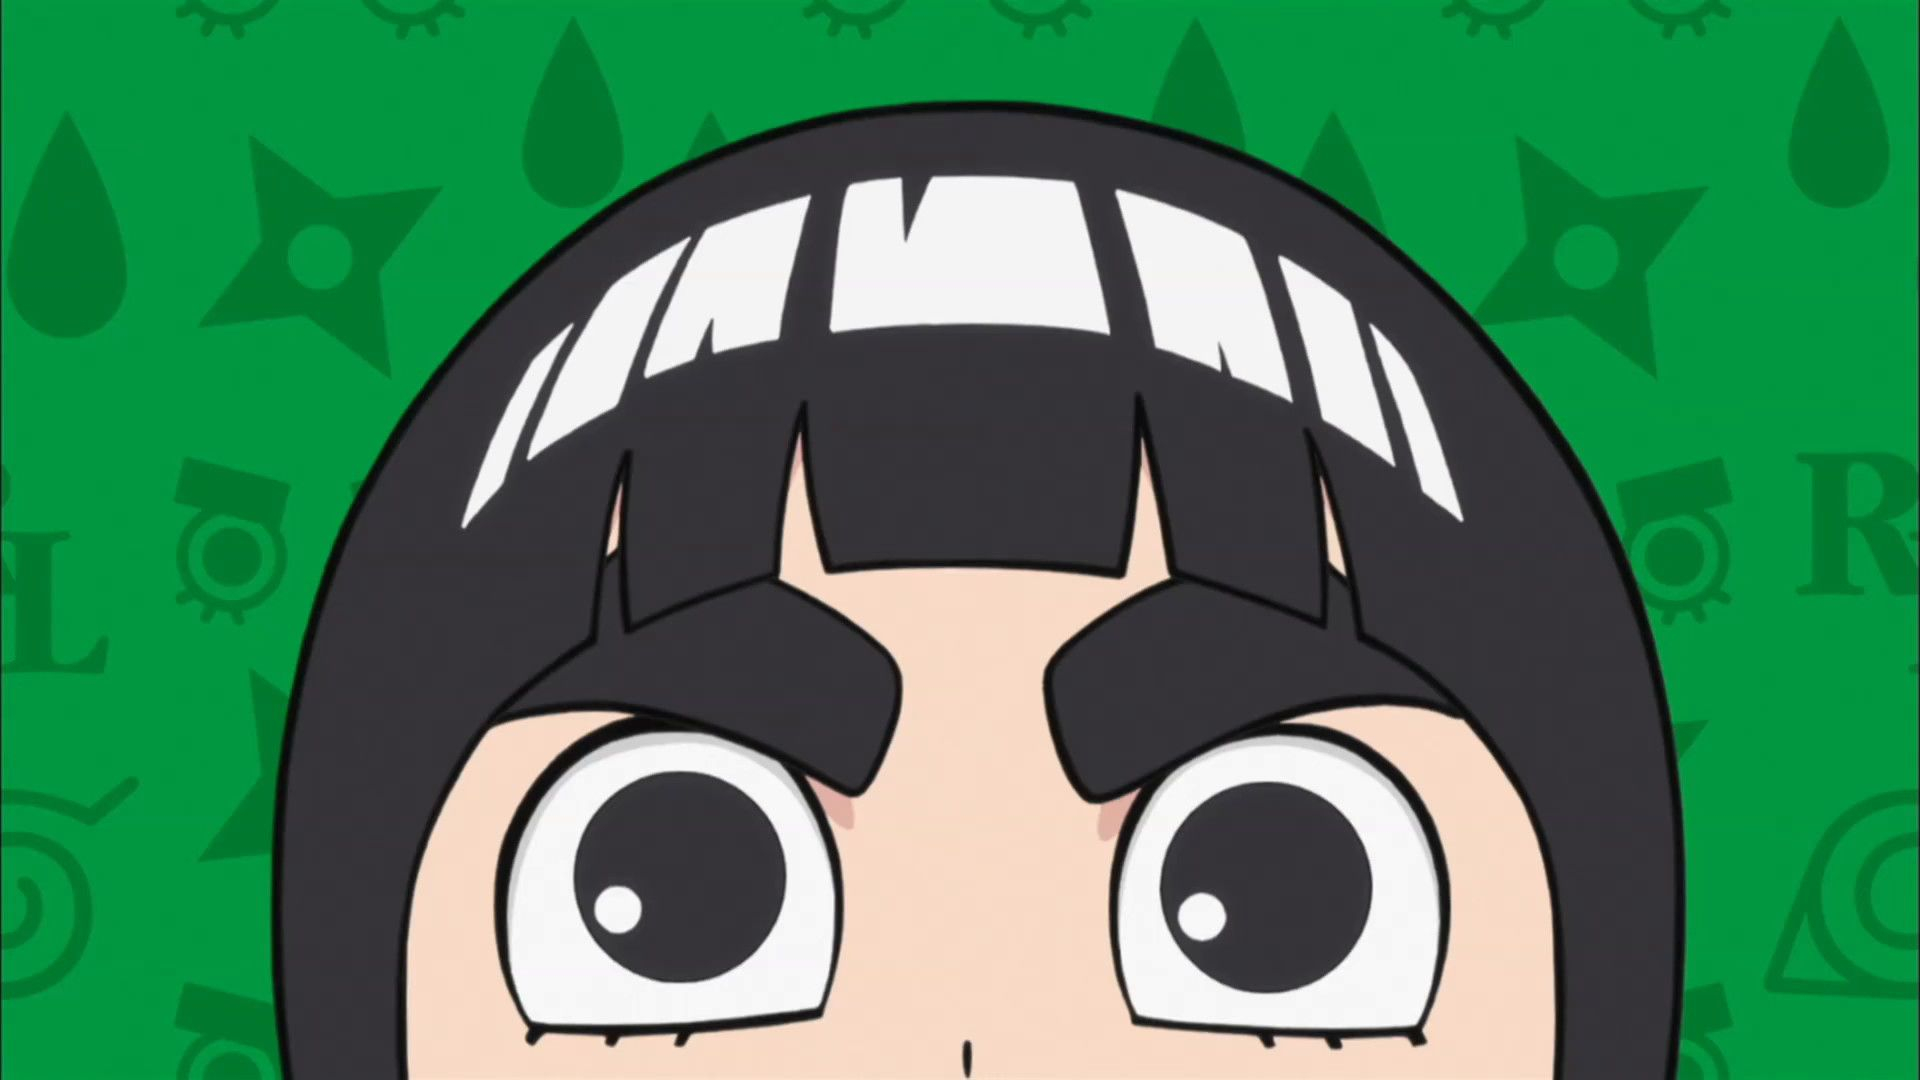 1920x1080 Download Rock Lee Wallpaper for desktop or mobile device. Make your device cooler and more beautiful. | Rock lee, Chibi, Wallpaper